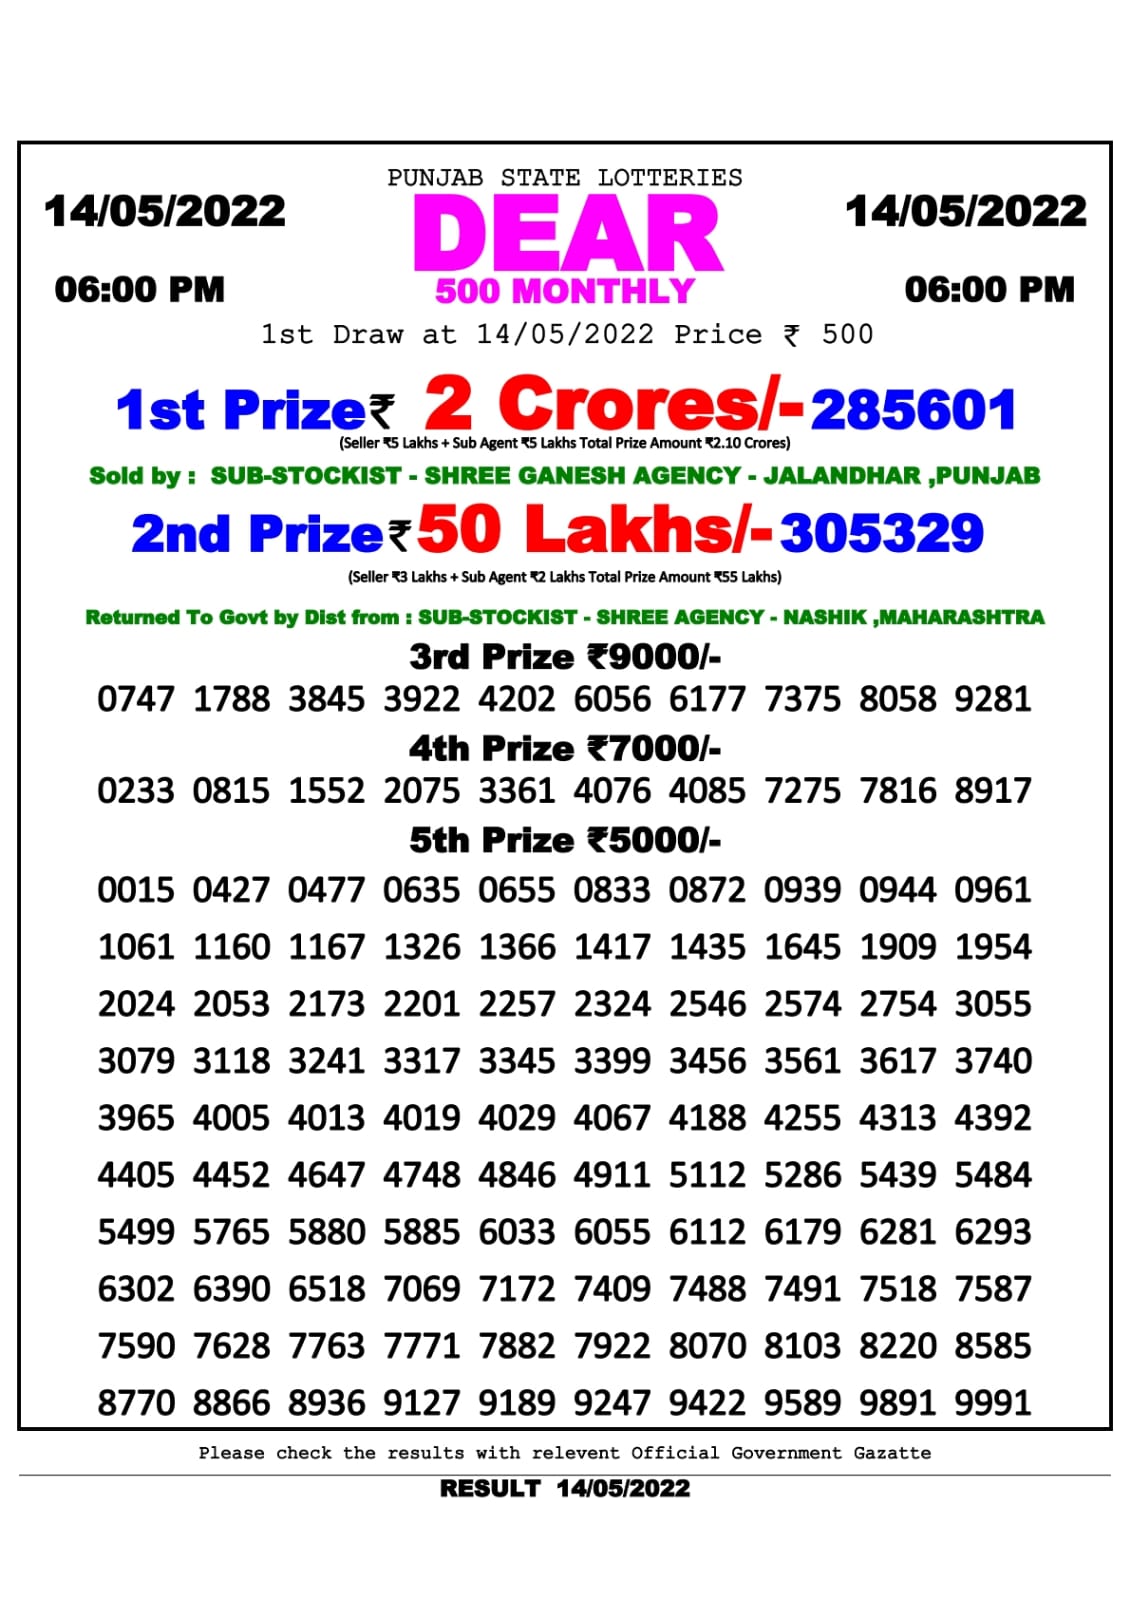 PUNJAB STATE DEAR 500 MONTHLY LOTTERY DRAW ON 6.00 P.M 14 MAY 2022